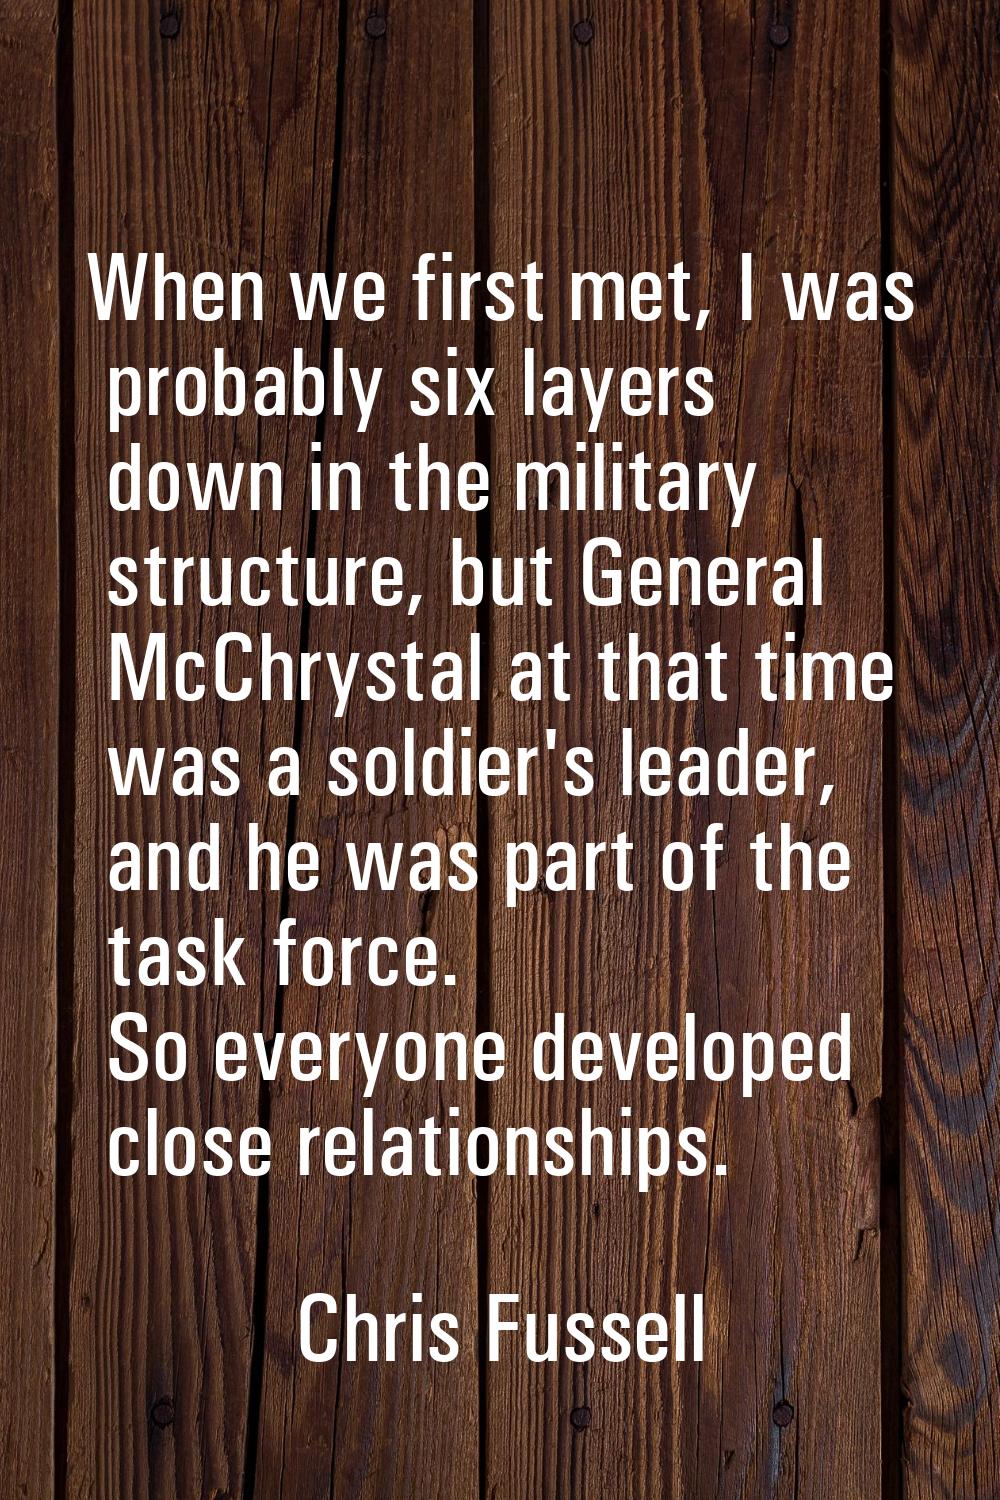 When we first met, I was probably six layers down in the military structure, but General McChrystal